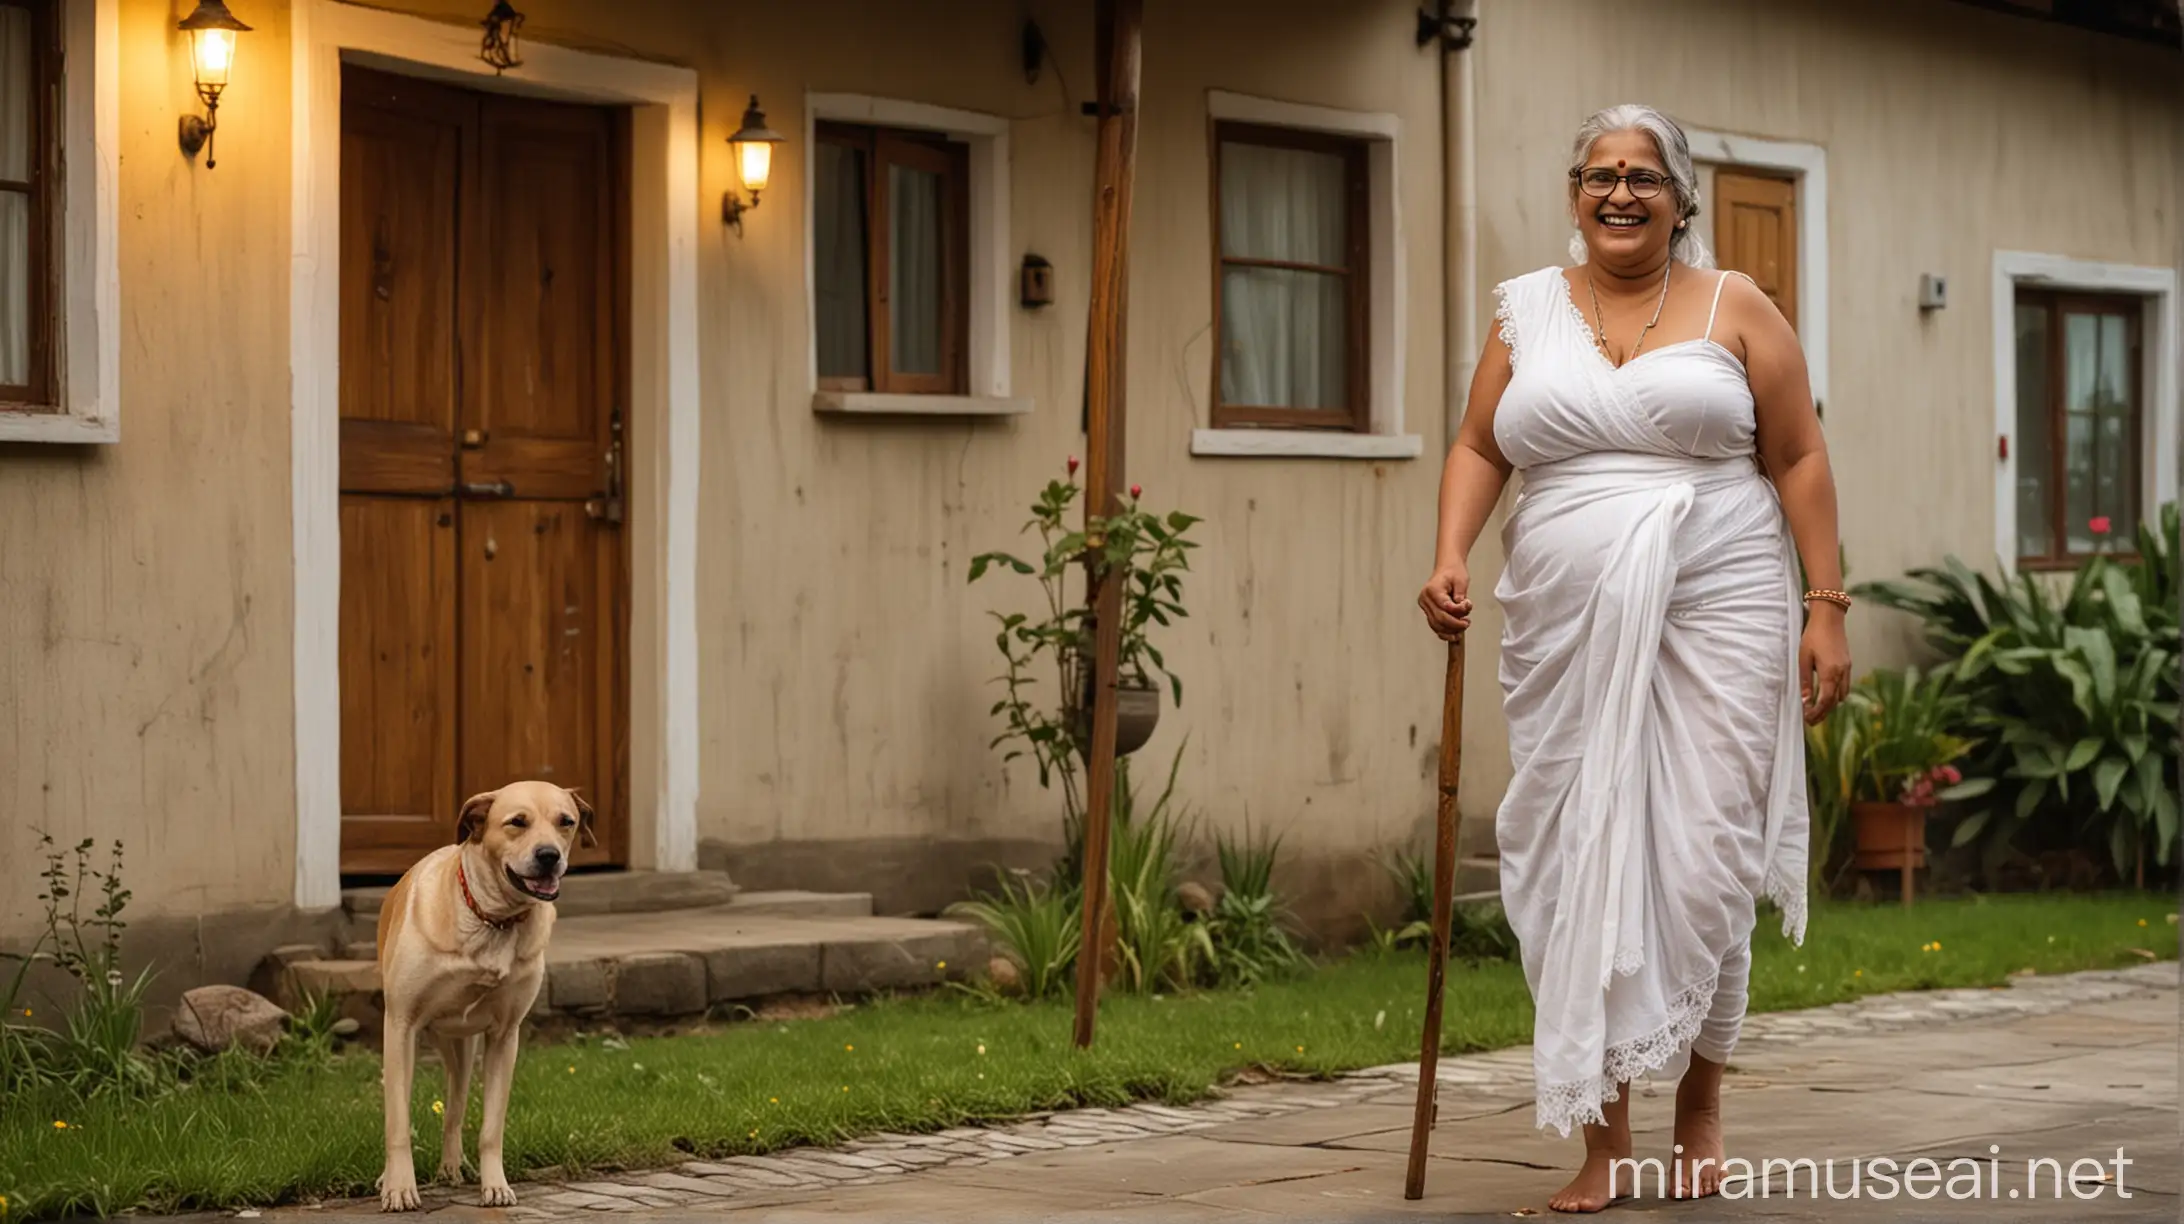 
sweet faced old desi  very curvy  fat   woman  with big breasts with tick hair binding on head and big belly walking with one  wooden walking stick wearing   only a white towel  on her body  and a golden neck lace and a spectacles. she is happy and laughing . she is  standing with her dog  . its night  time and in background there is a luxurious farm house  with bulb light and luxurious house   with flowers and grass and concrete floor and it is raining . she is wearing golden sleepers on feet.
